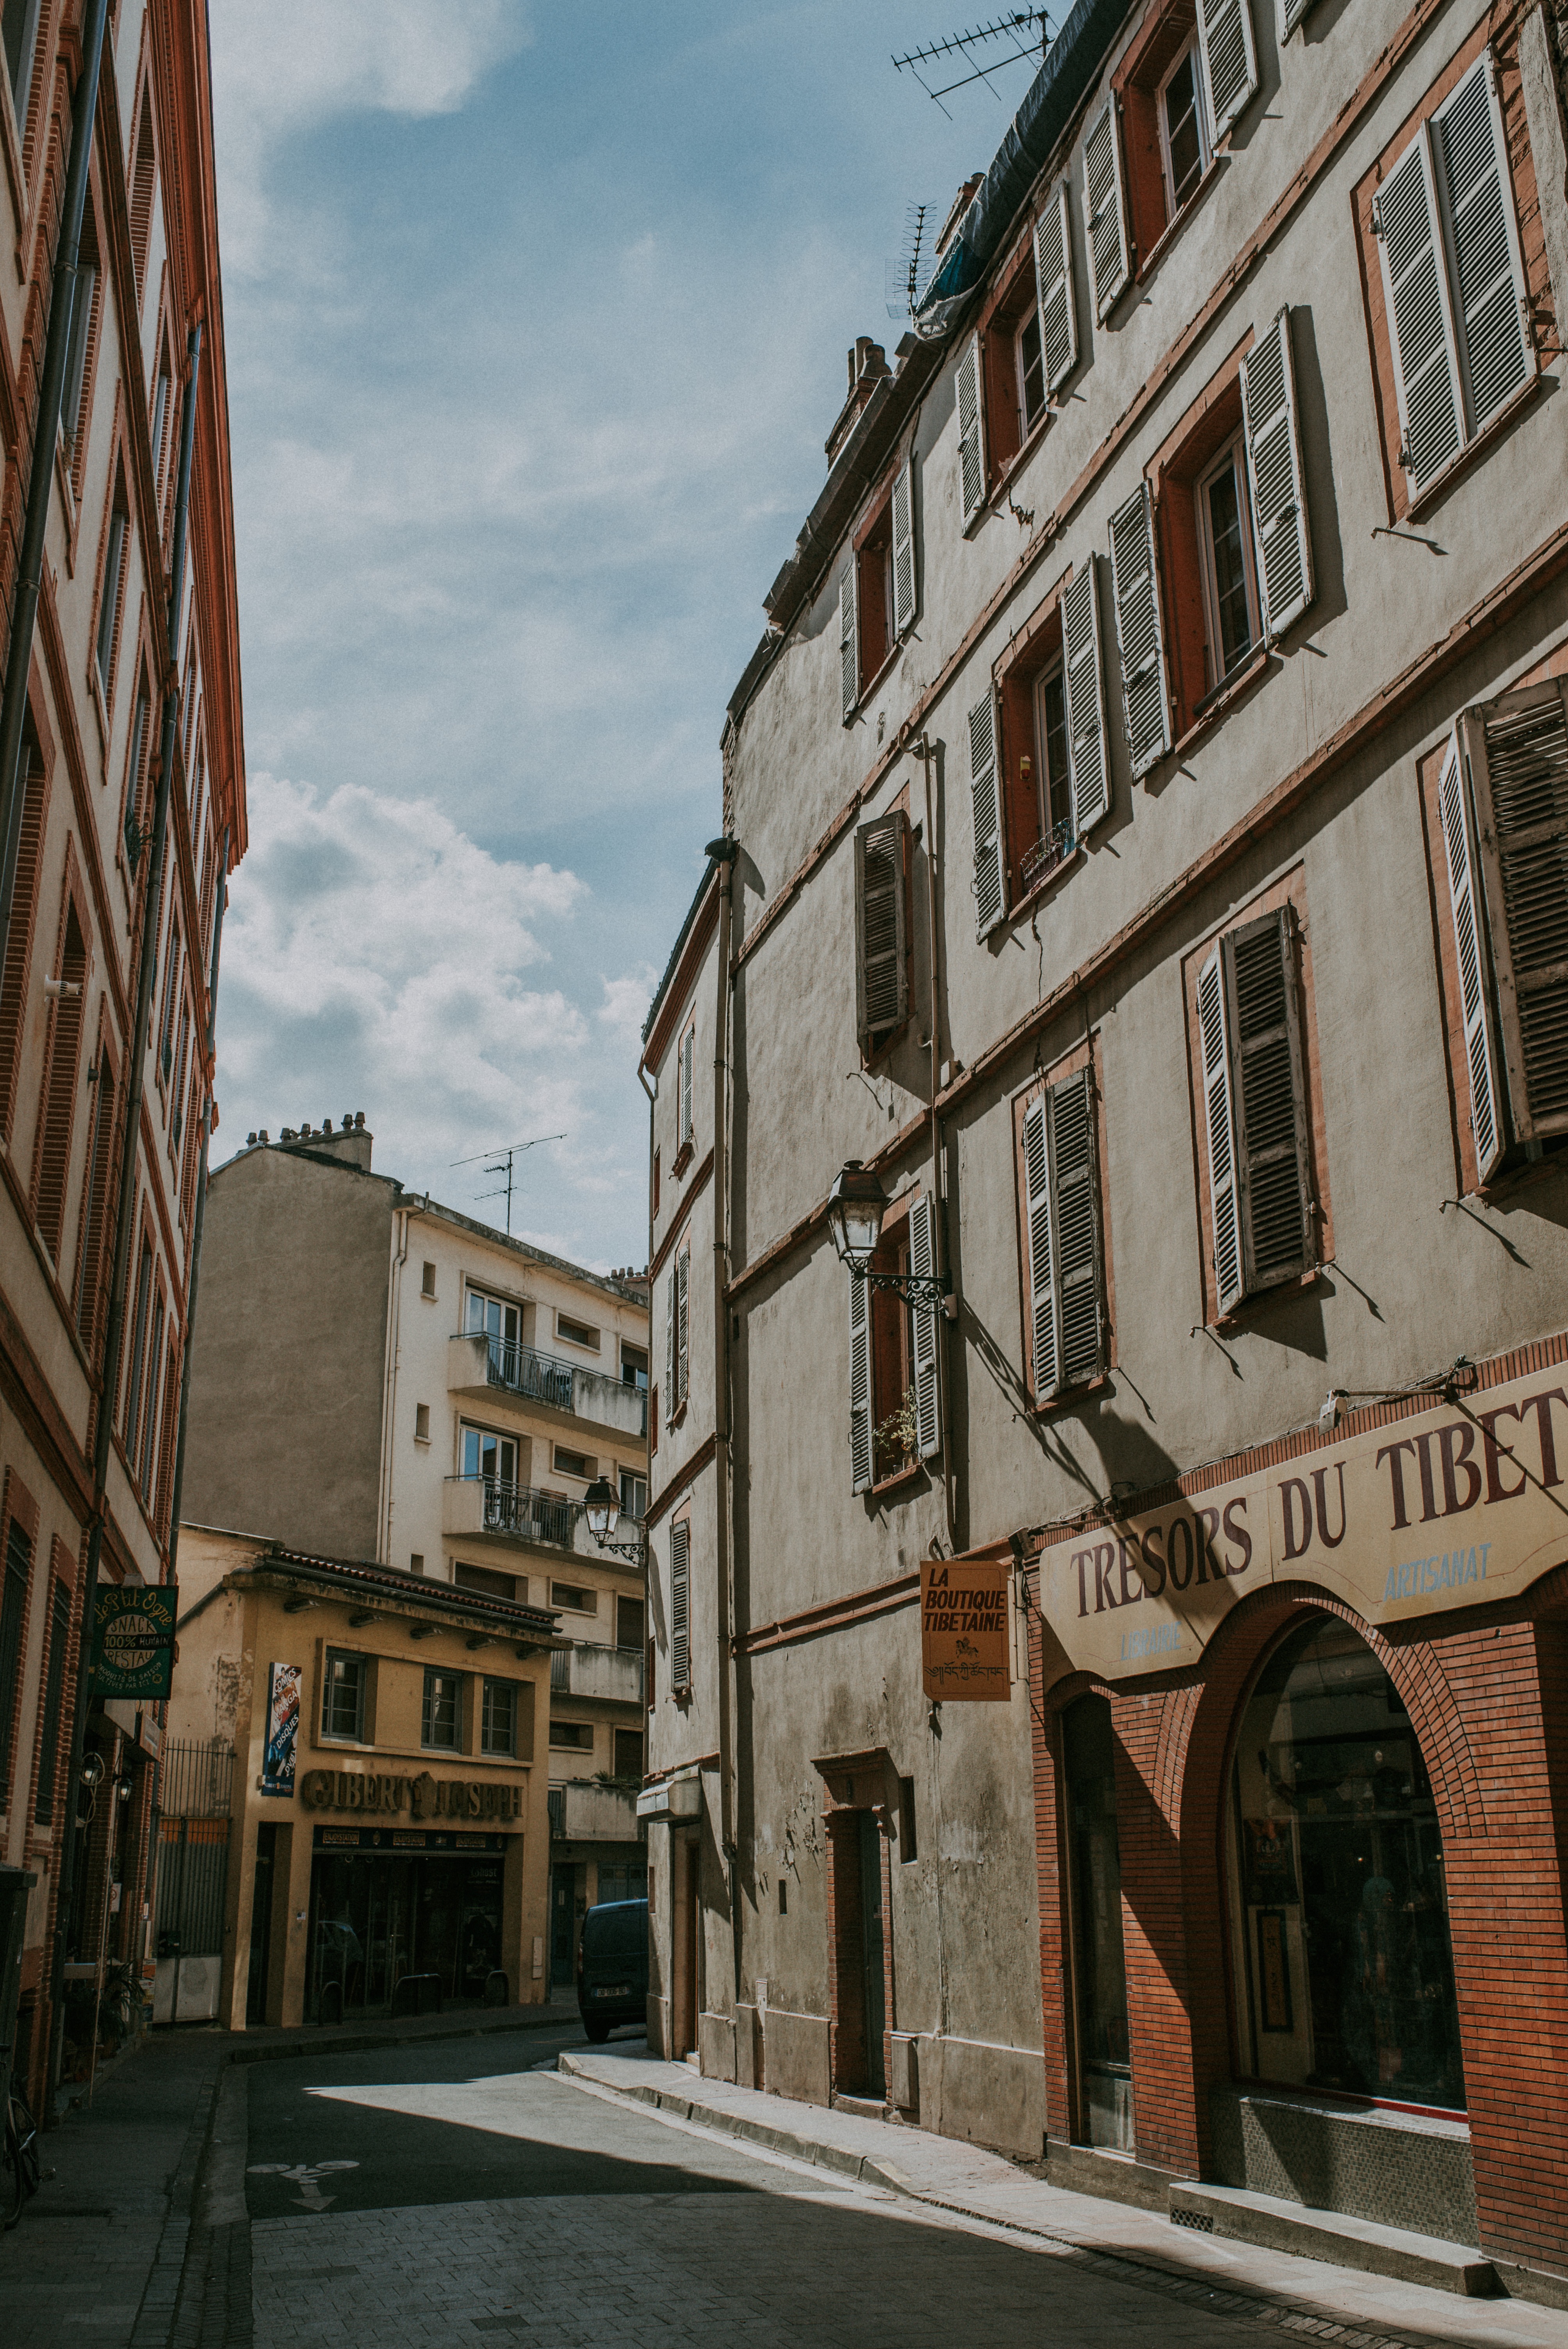 TWO DAYS IN TOULOUSE | LA VILLE ROSE – Alice Catherine